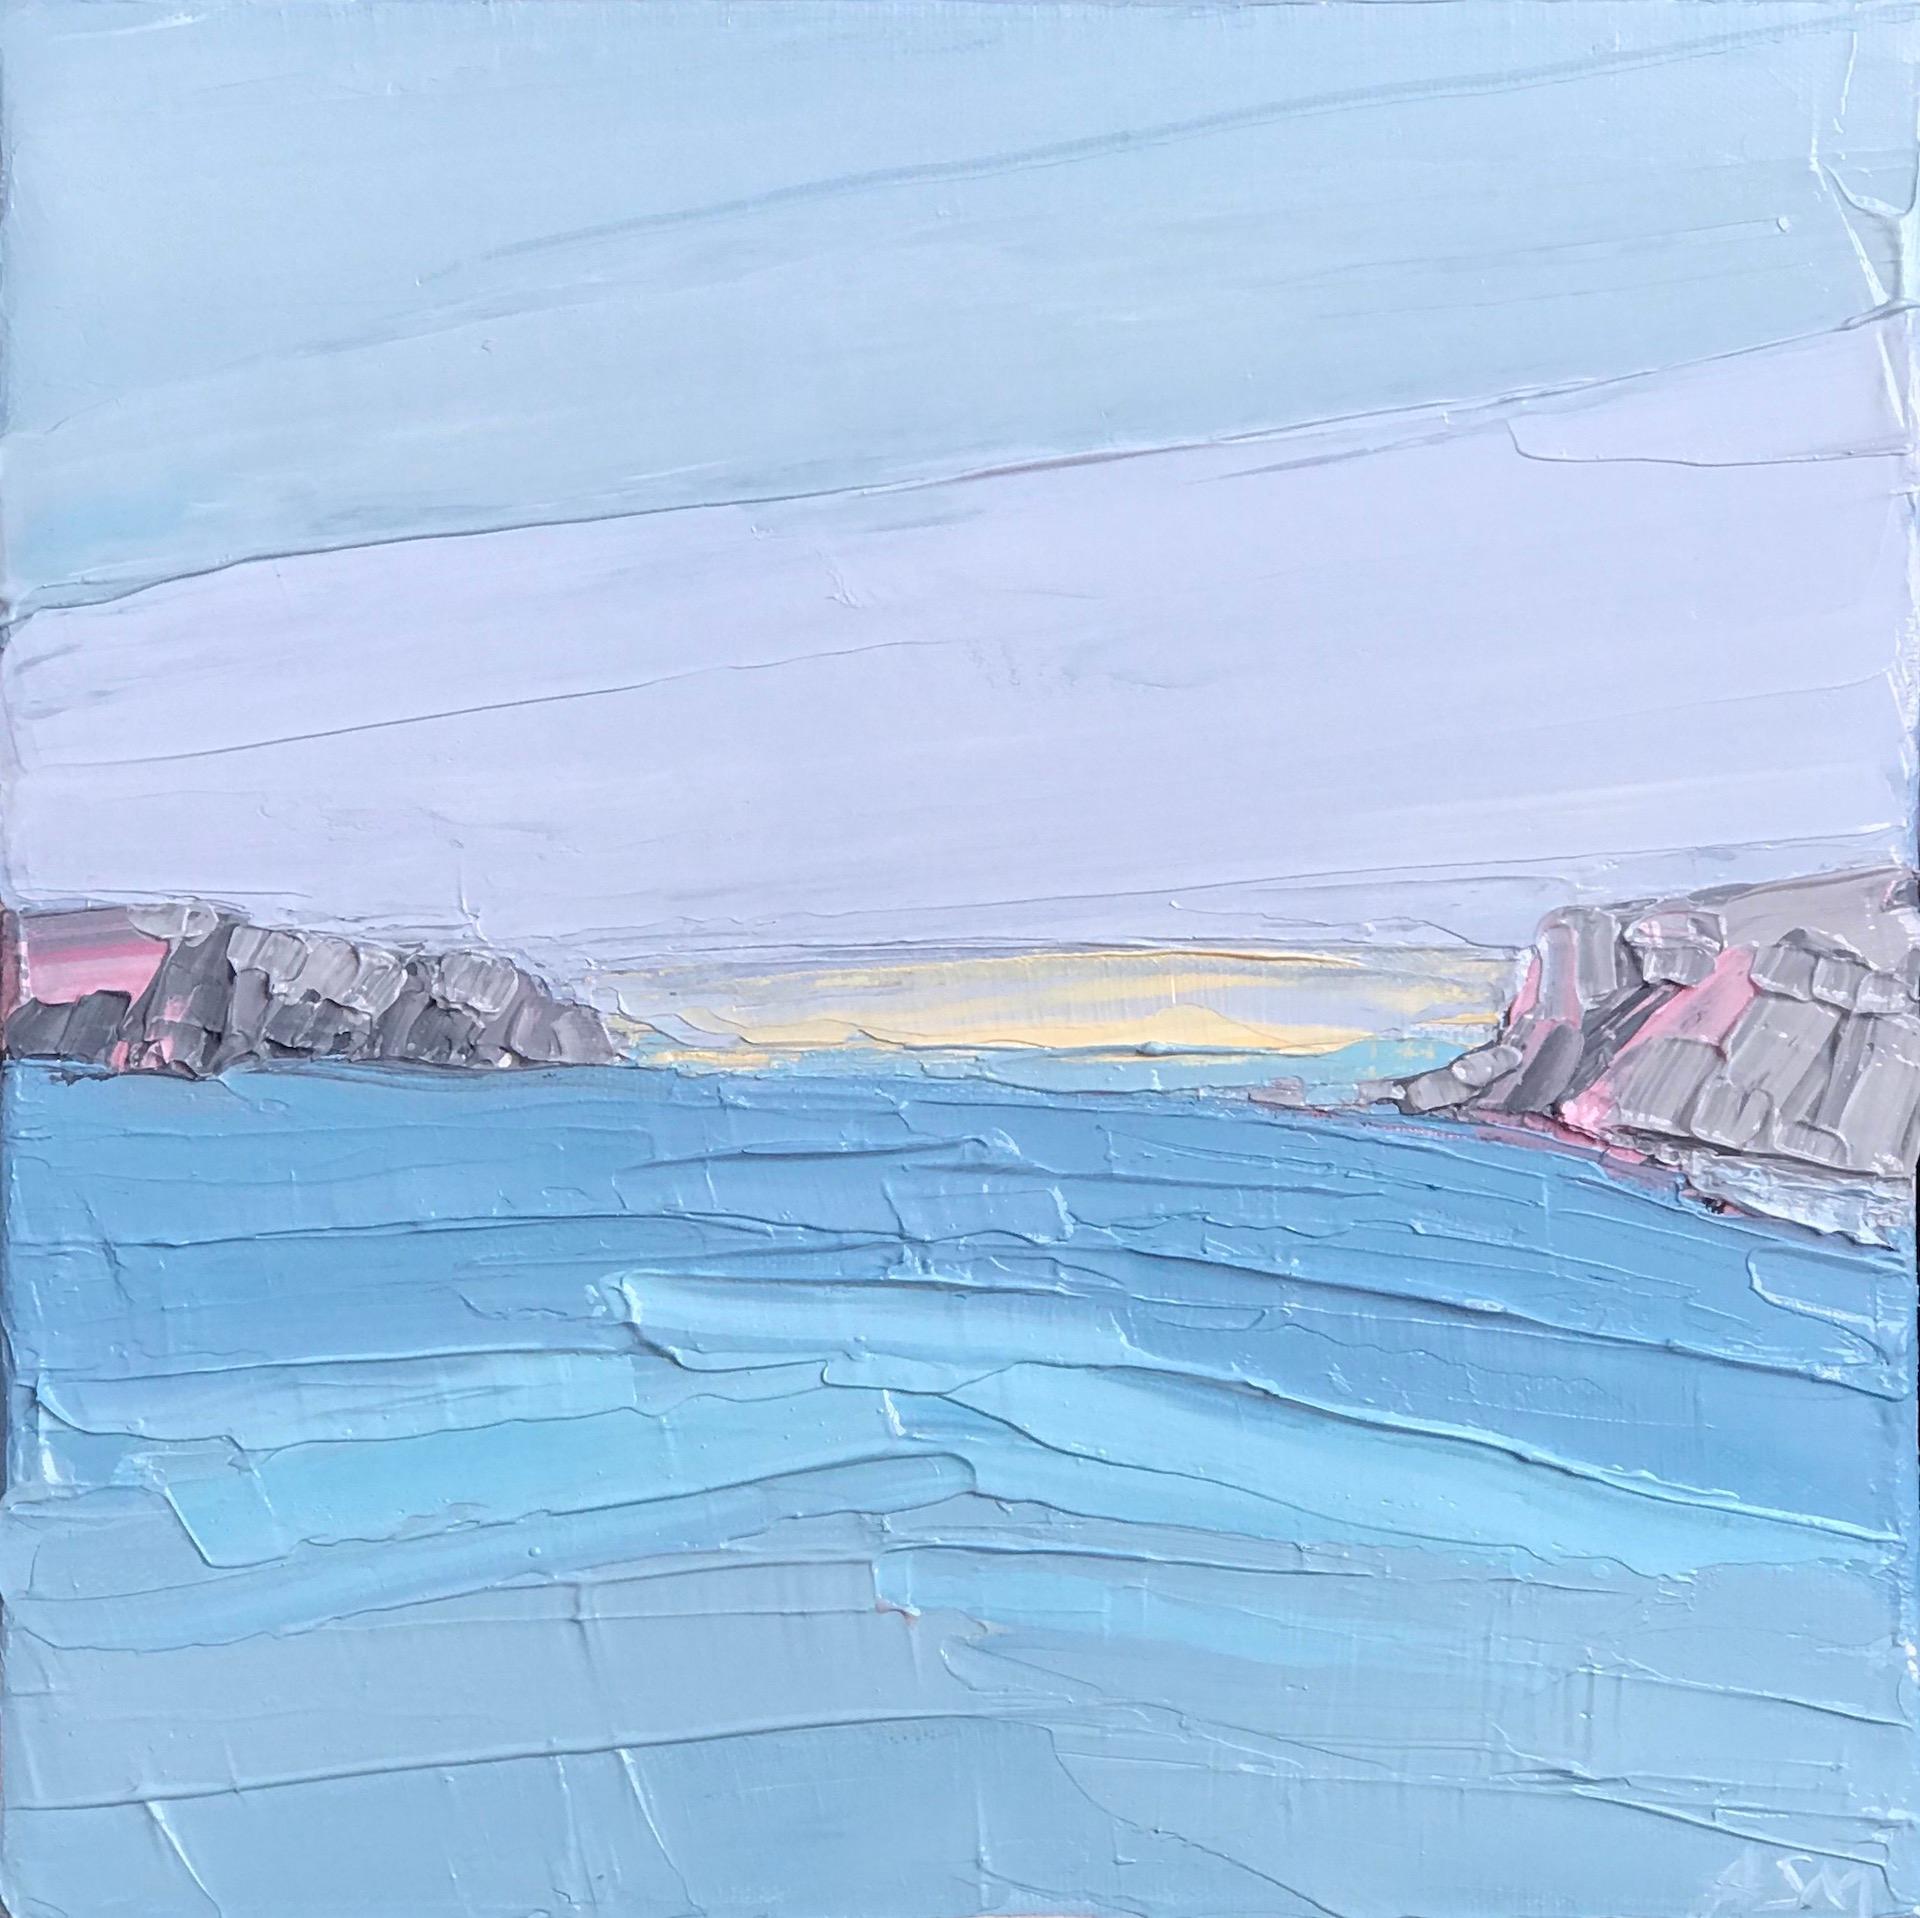 Annabel Menheneott
Lulworth Light
Original Painting
Acrylic on canvas
Canvas Size:30 cm x 30 cm x 3.5 cm
Framed Size: 35 cm x 35 cm x 5.5 cm
Sold Framed in a bespoke contemporary tray frame painted in Wimborne White
Free Shipping
Please note that in